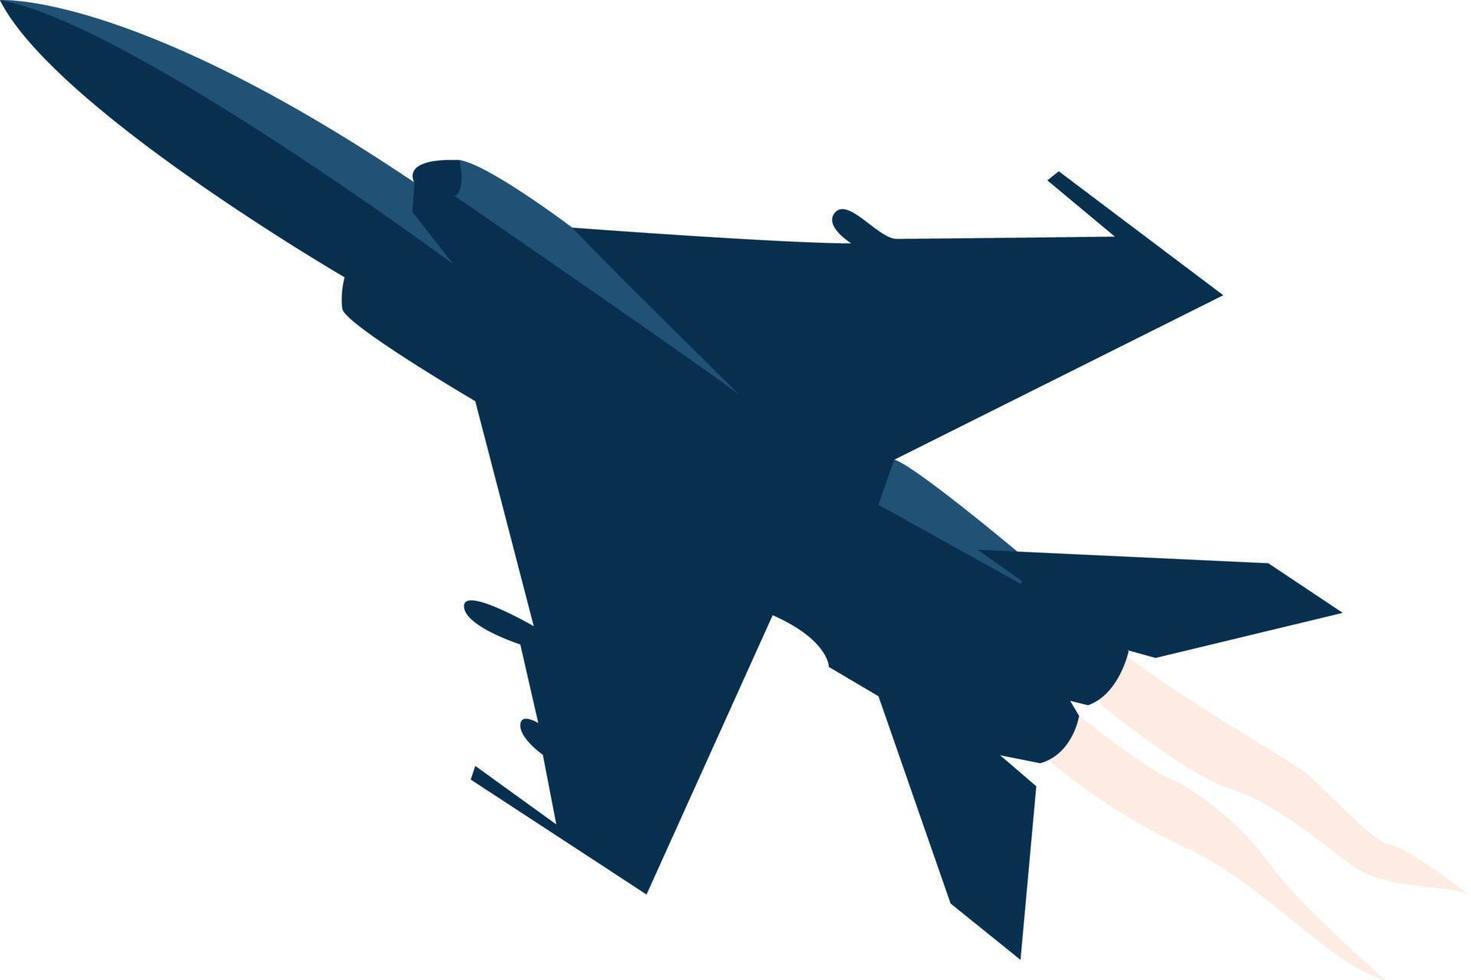 Fighter aircraft, illustration, vector on white background.